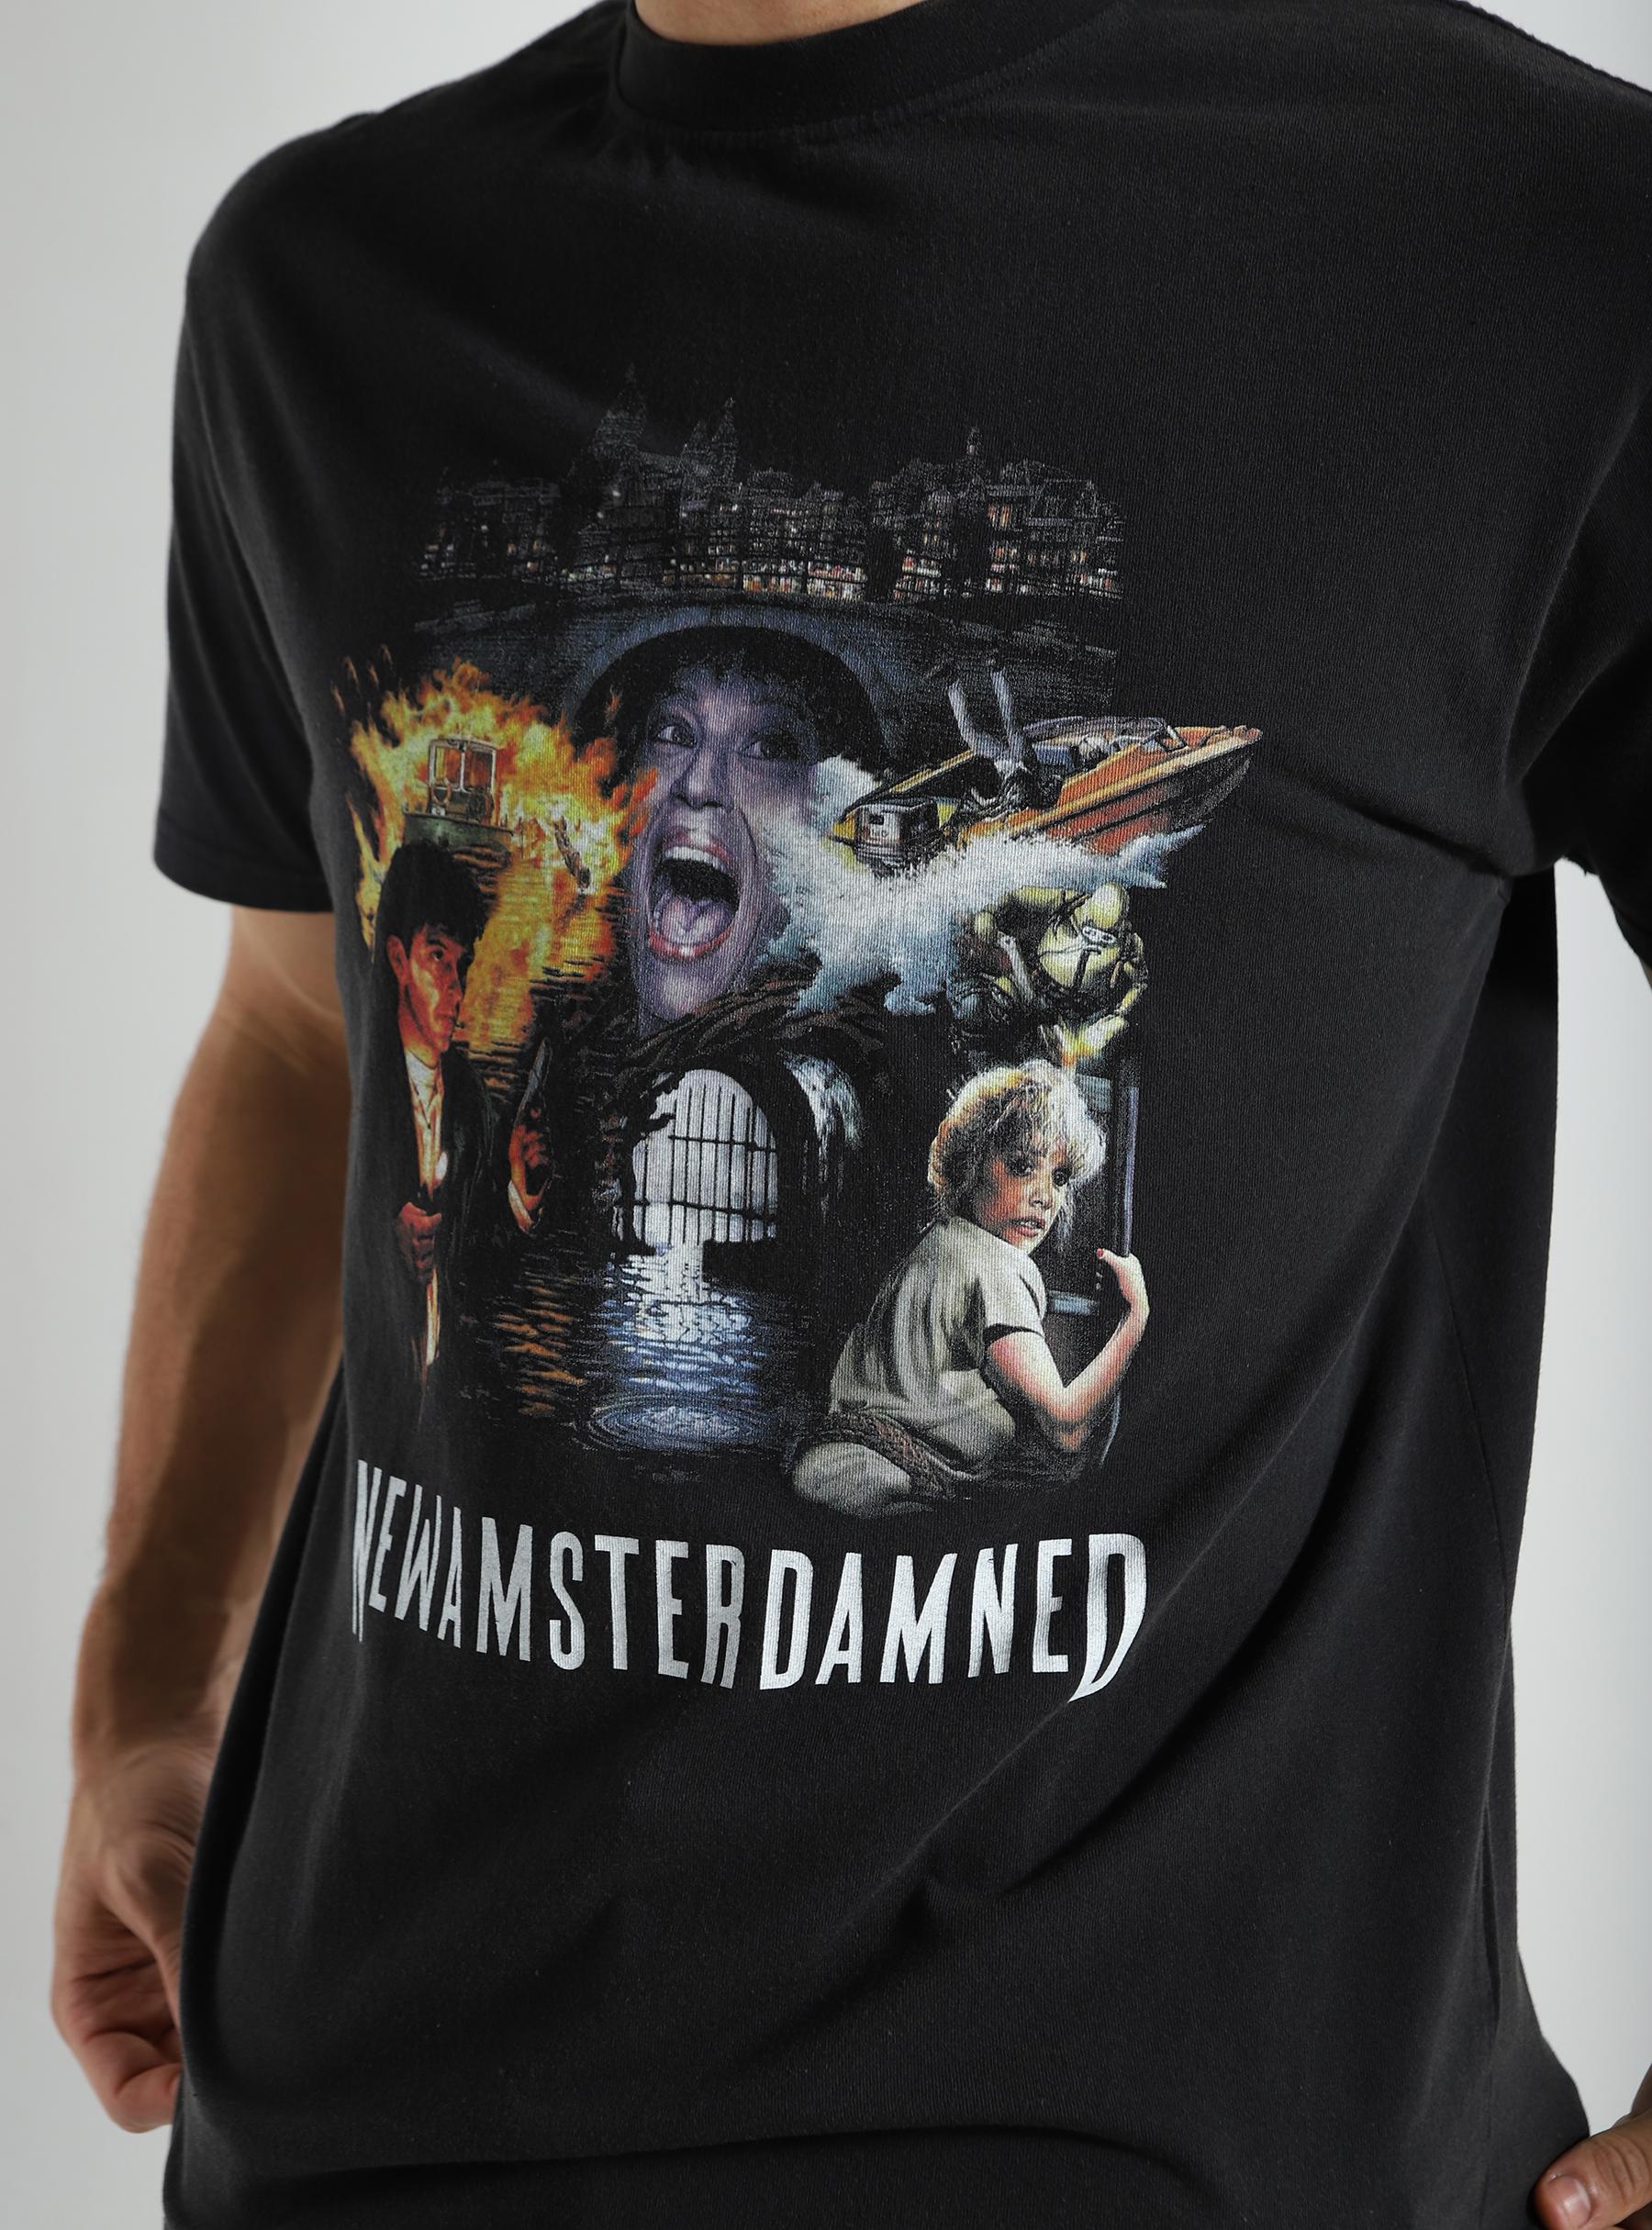 New Amsterdamned T-shirt 2401127001